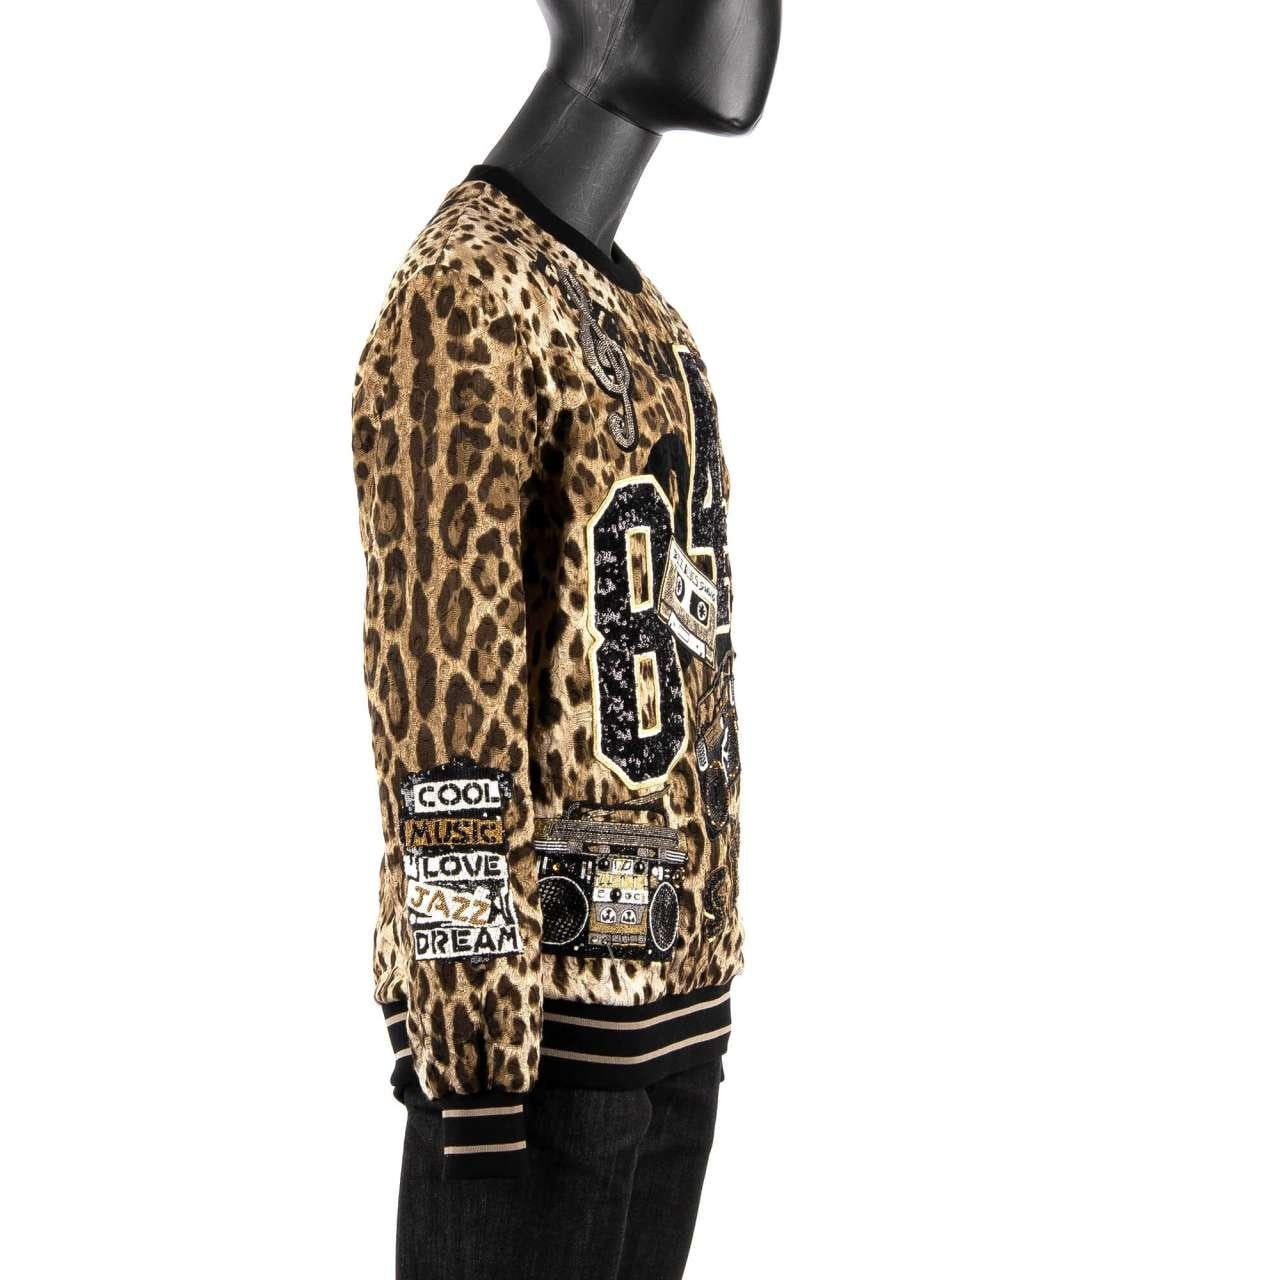 Men's D&G Leopard Printed Sweater with Jazz Samba Music Embroidery Black Brown 54 For Sale